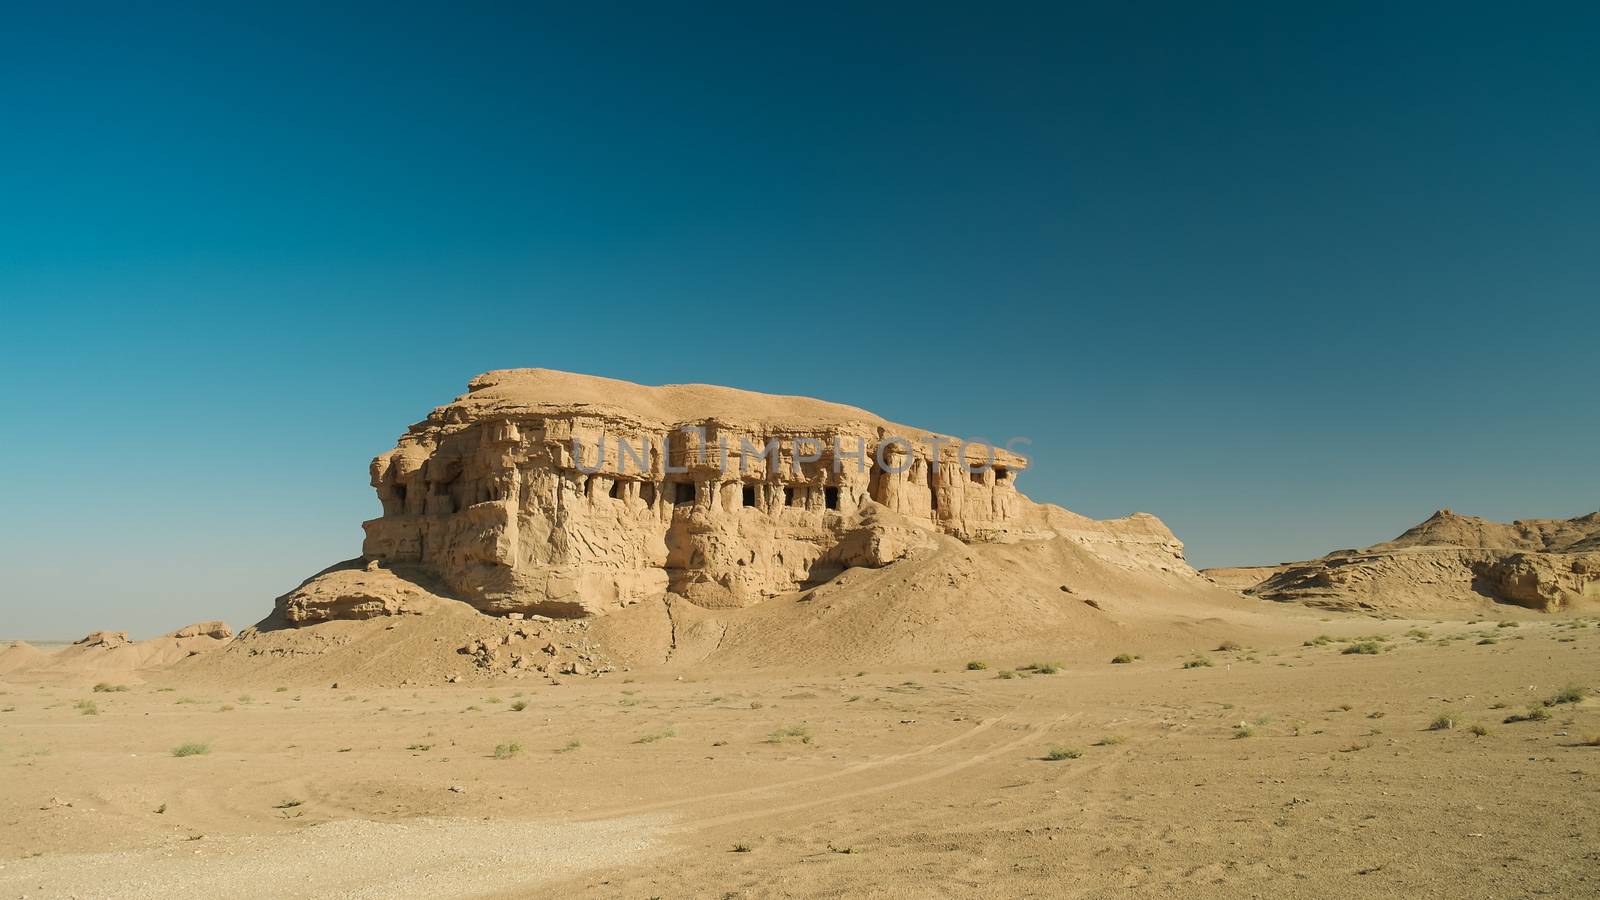 Butte at the dried shore of Razazza lake, Iraq by homocosmicos